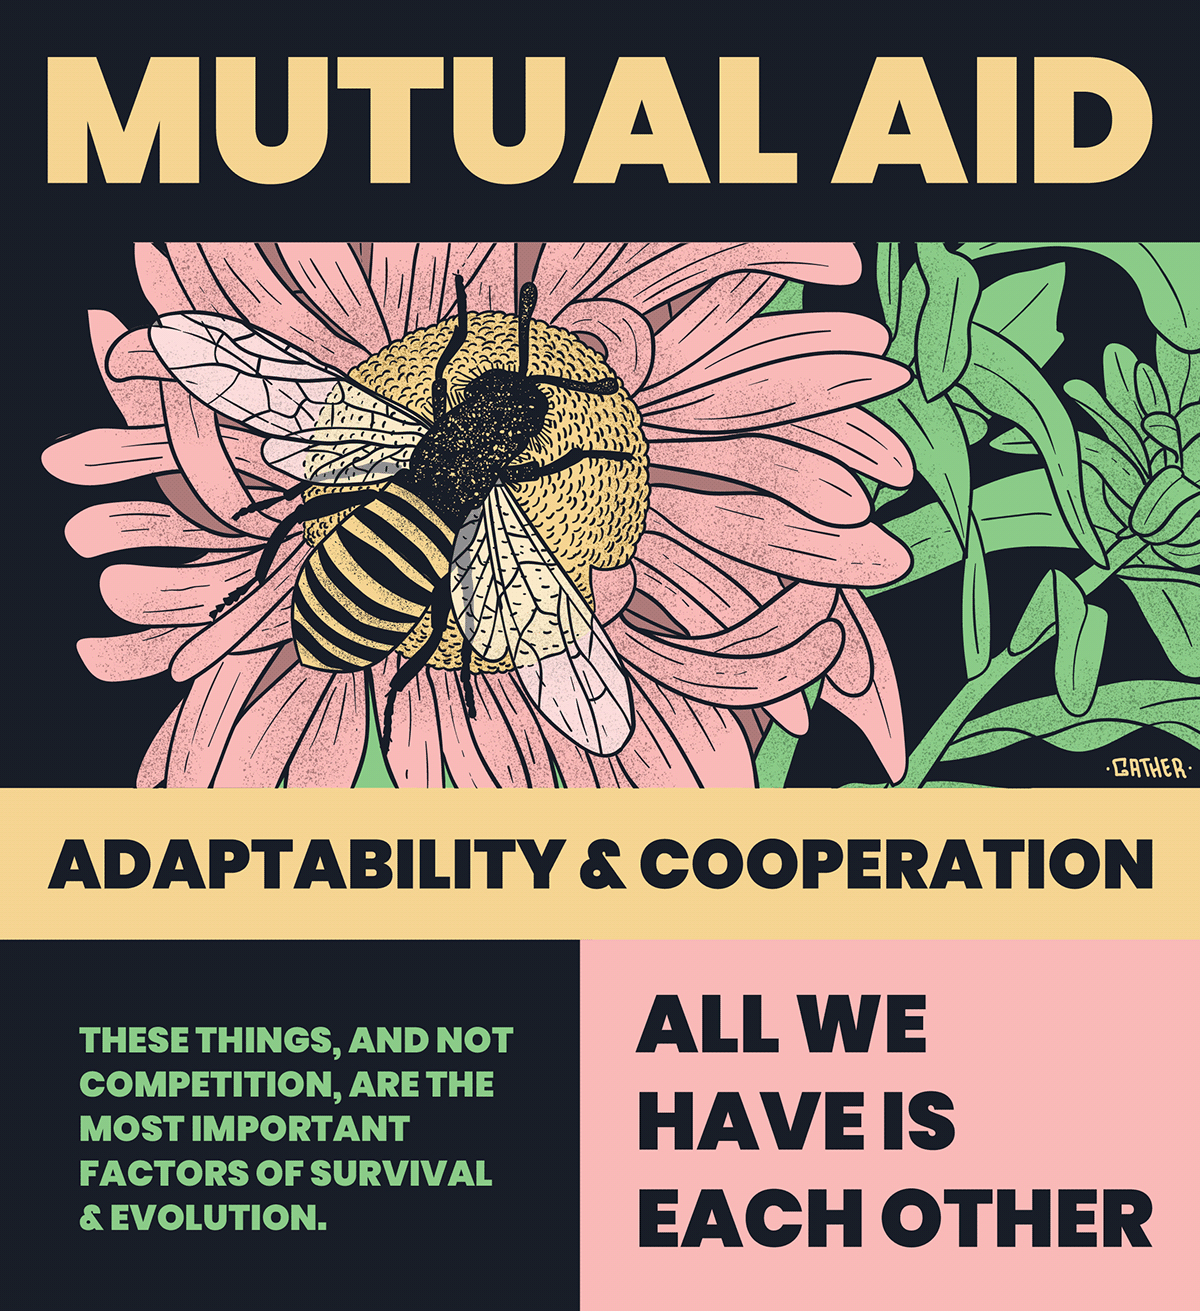 cooperation mutual aid adaptability evolution anarchism bee flower floral Nature symbiosis